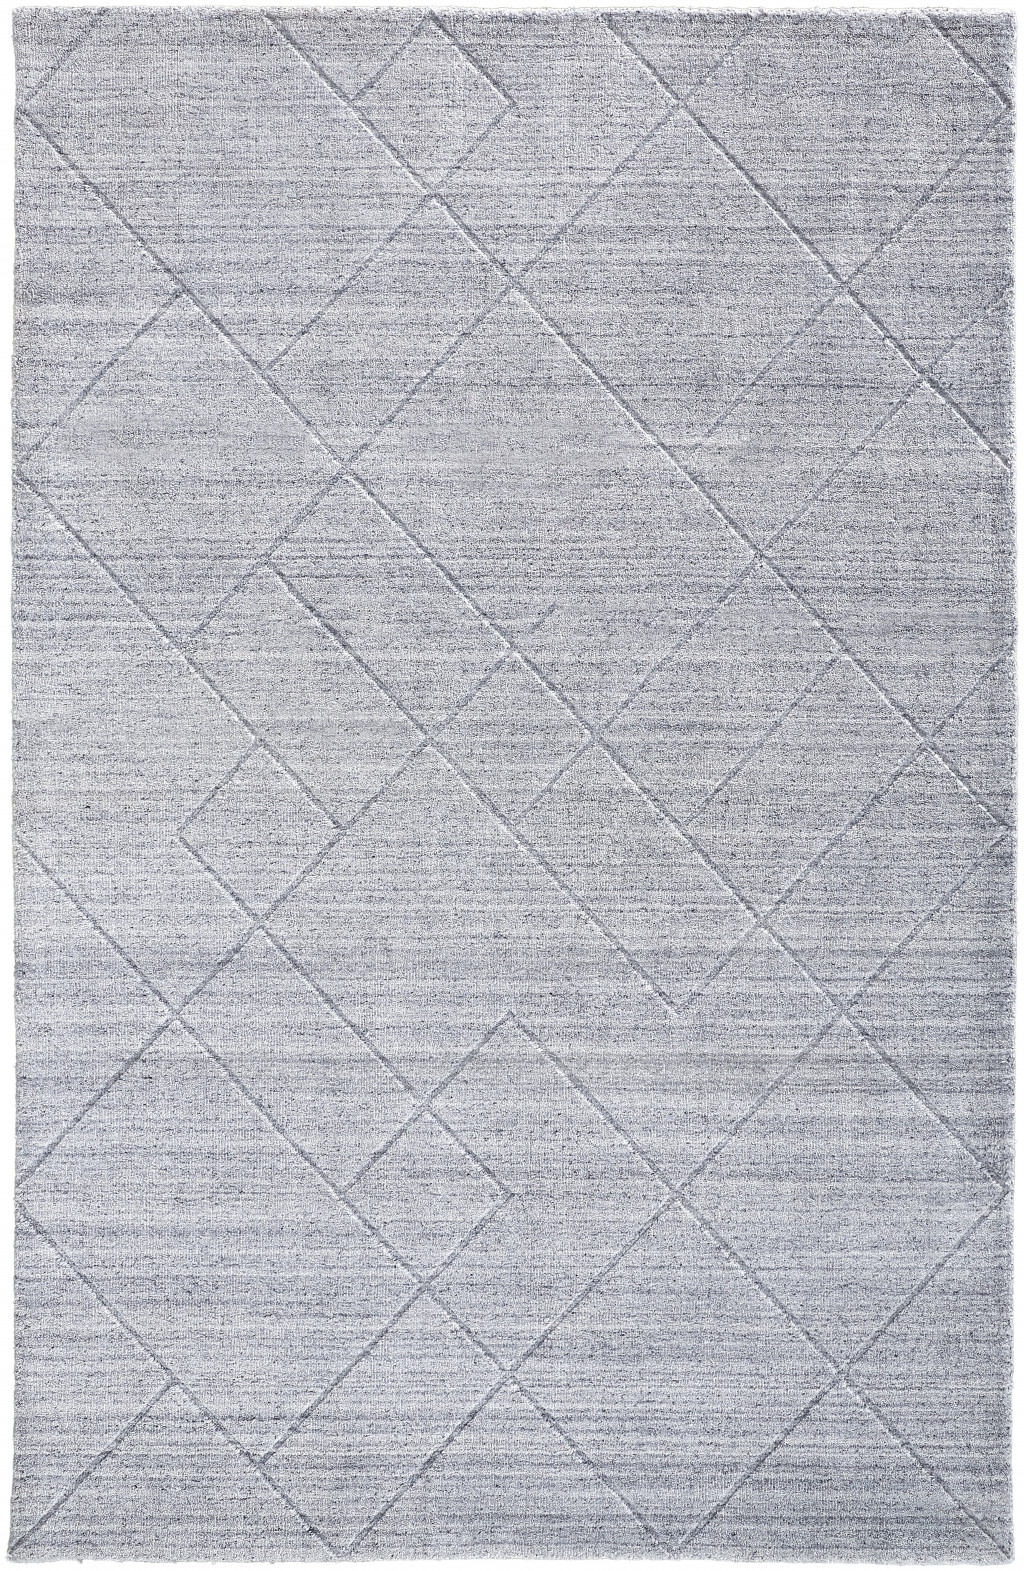 10' X 14' Gray And Silver Striped Hand Woven Area Rug-514795-1